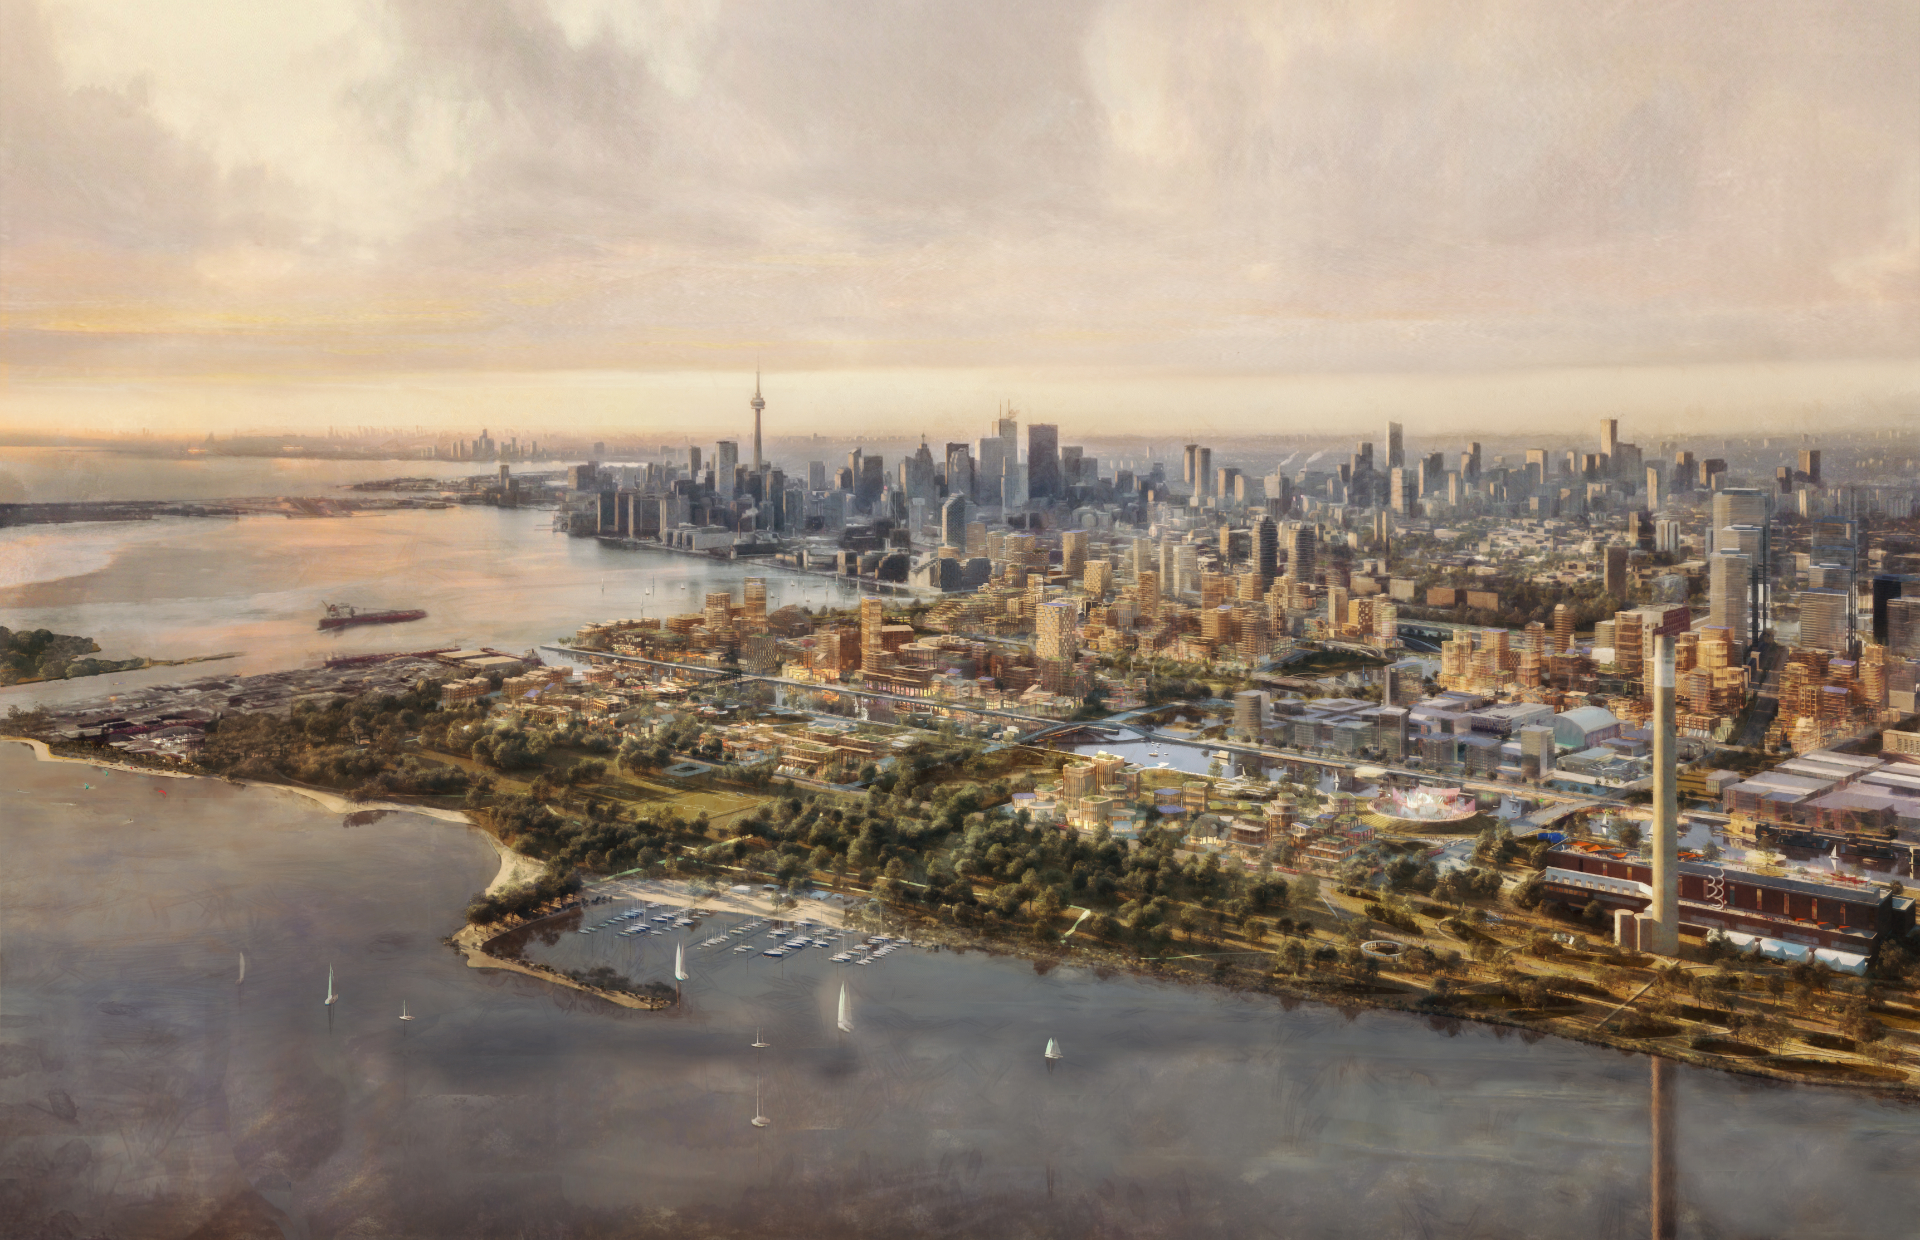 Sidewalk Labs reveals ambitious plan for Toronto's waterfront amid concerns about privacy and democratic rights